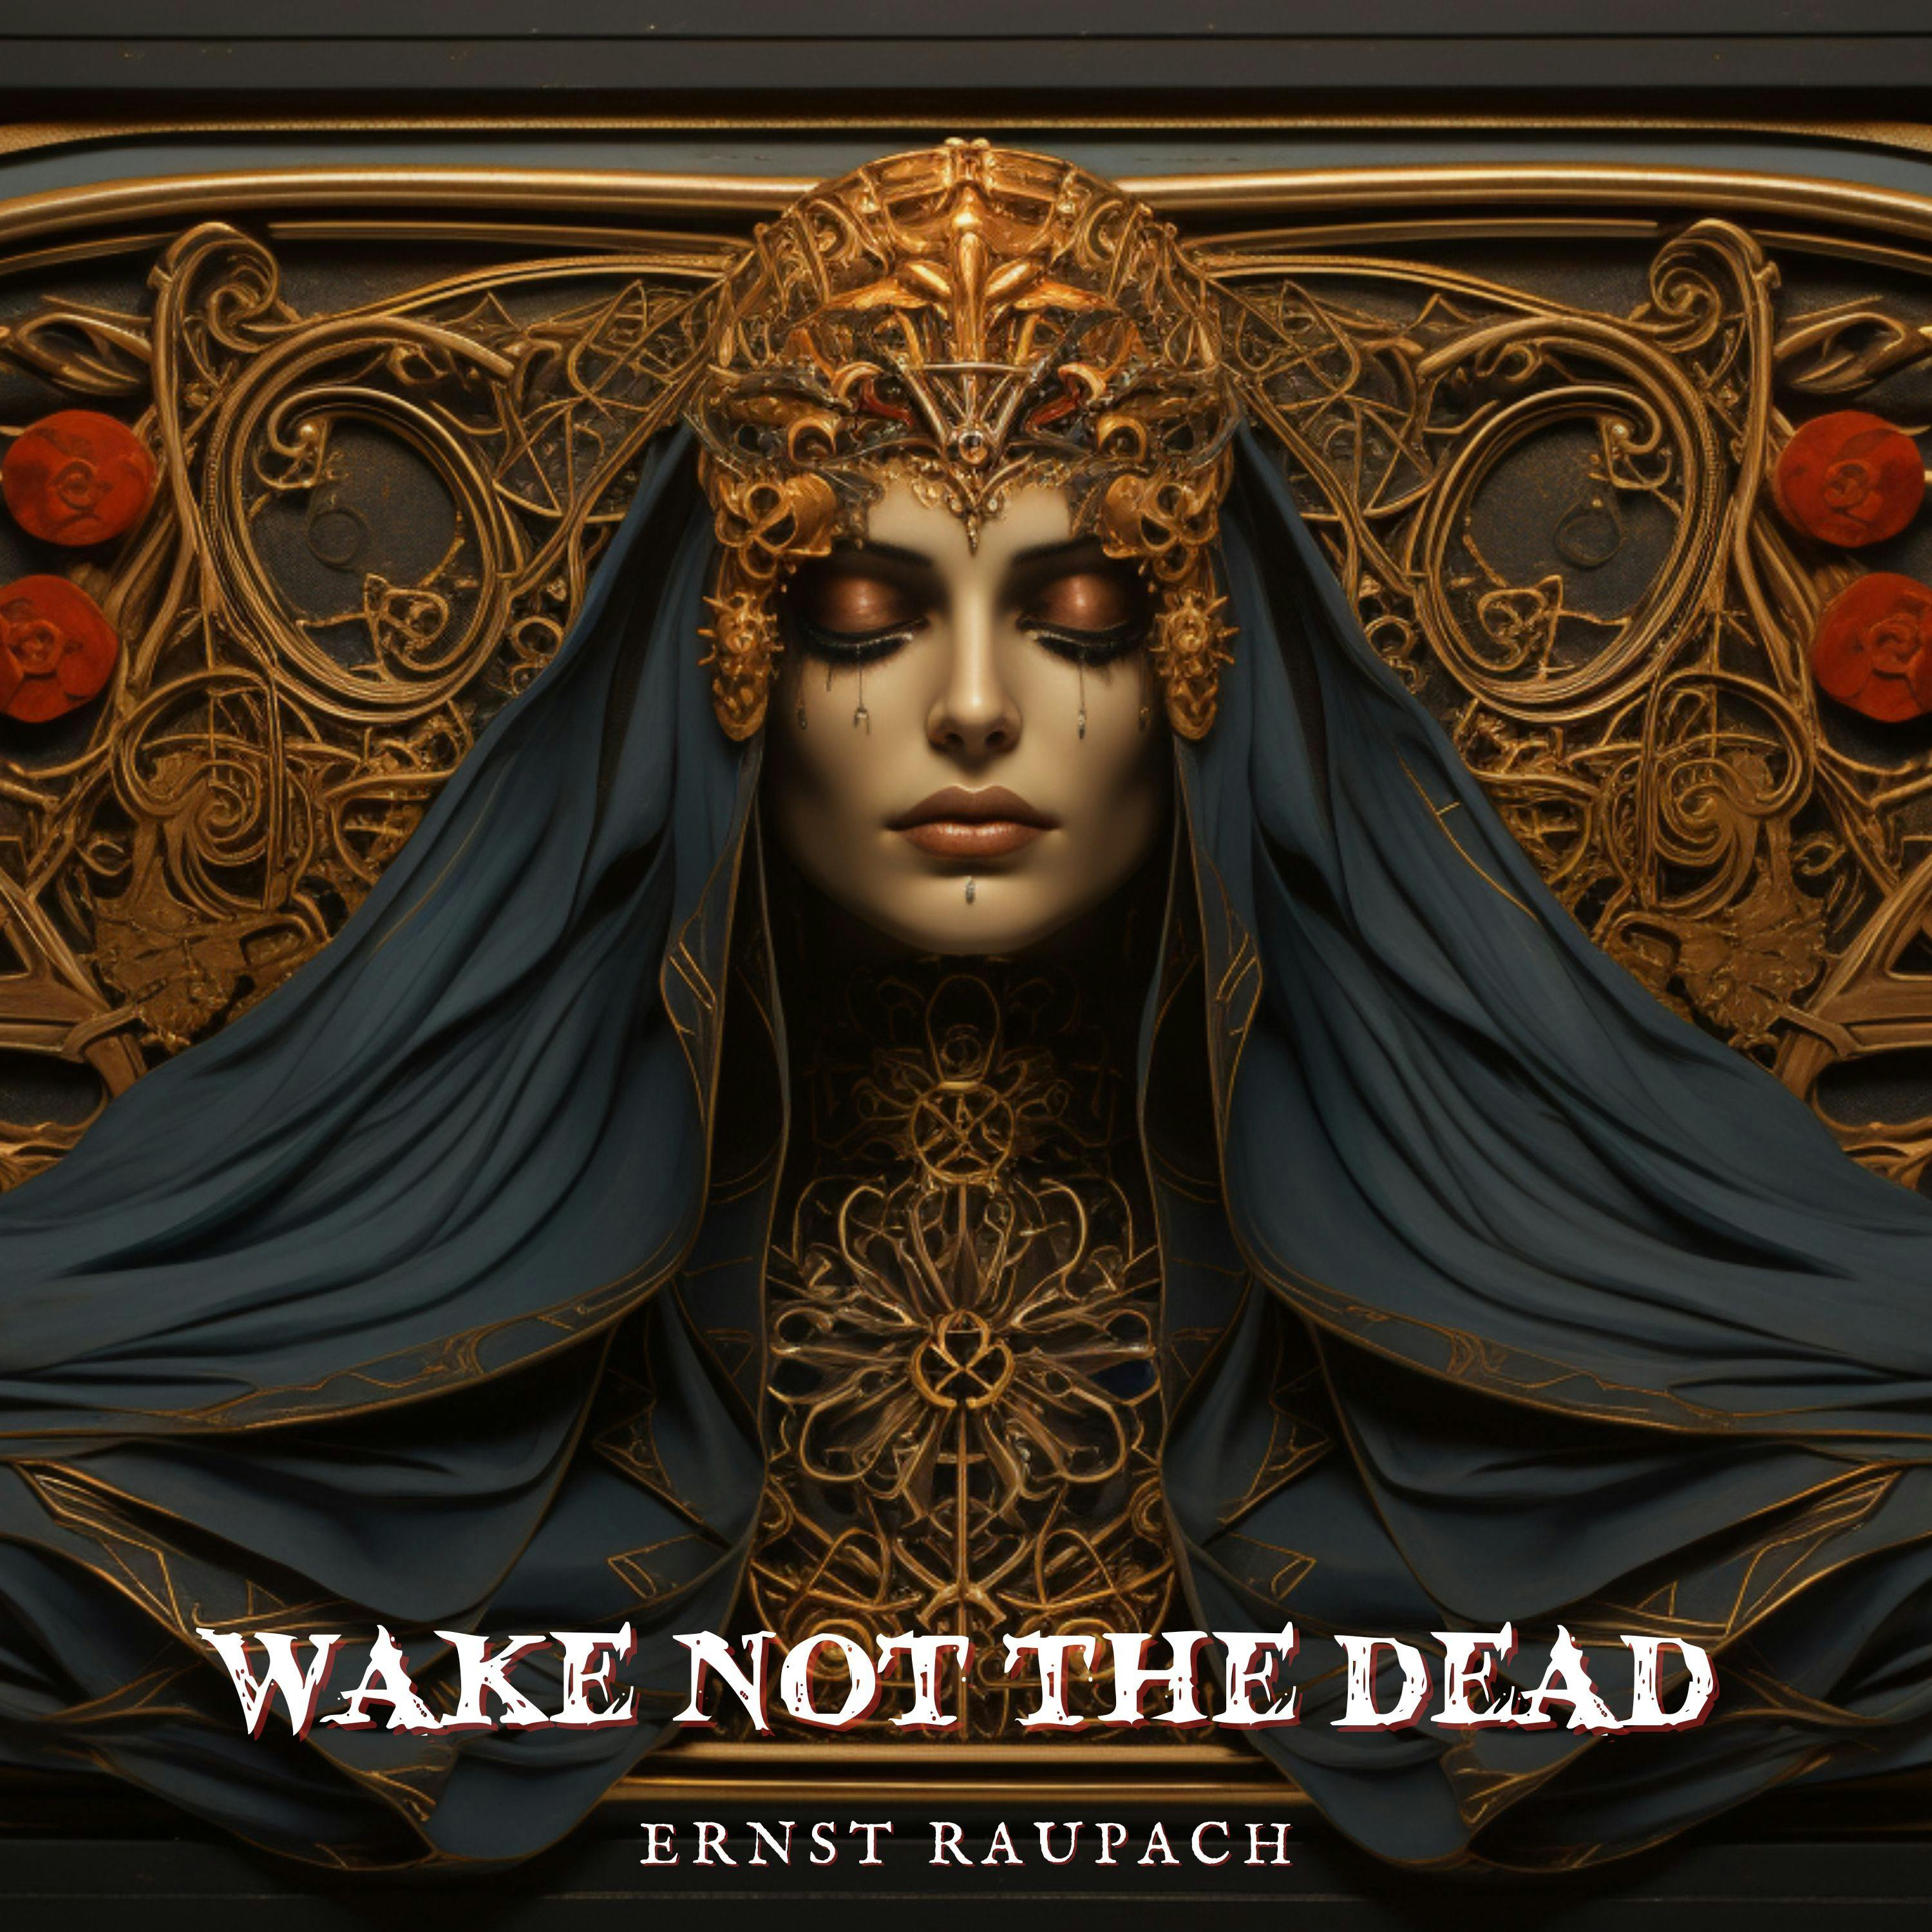 Wake Not The Dead by Ernst Raupach